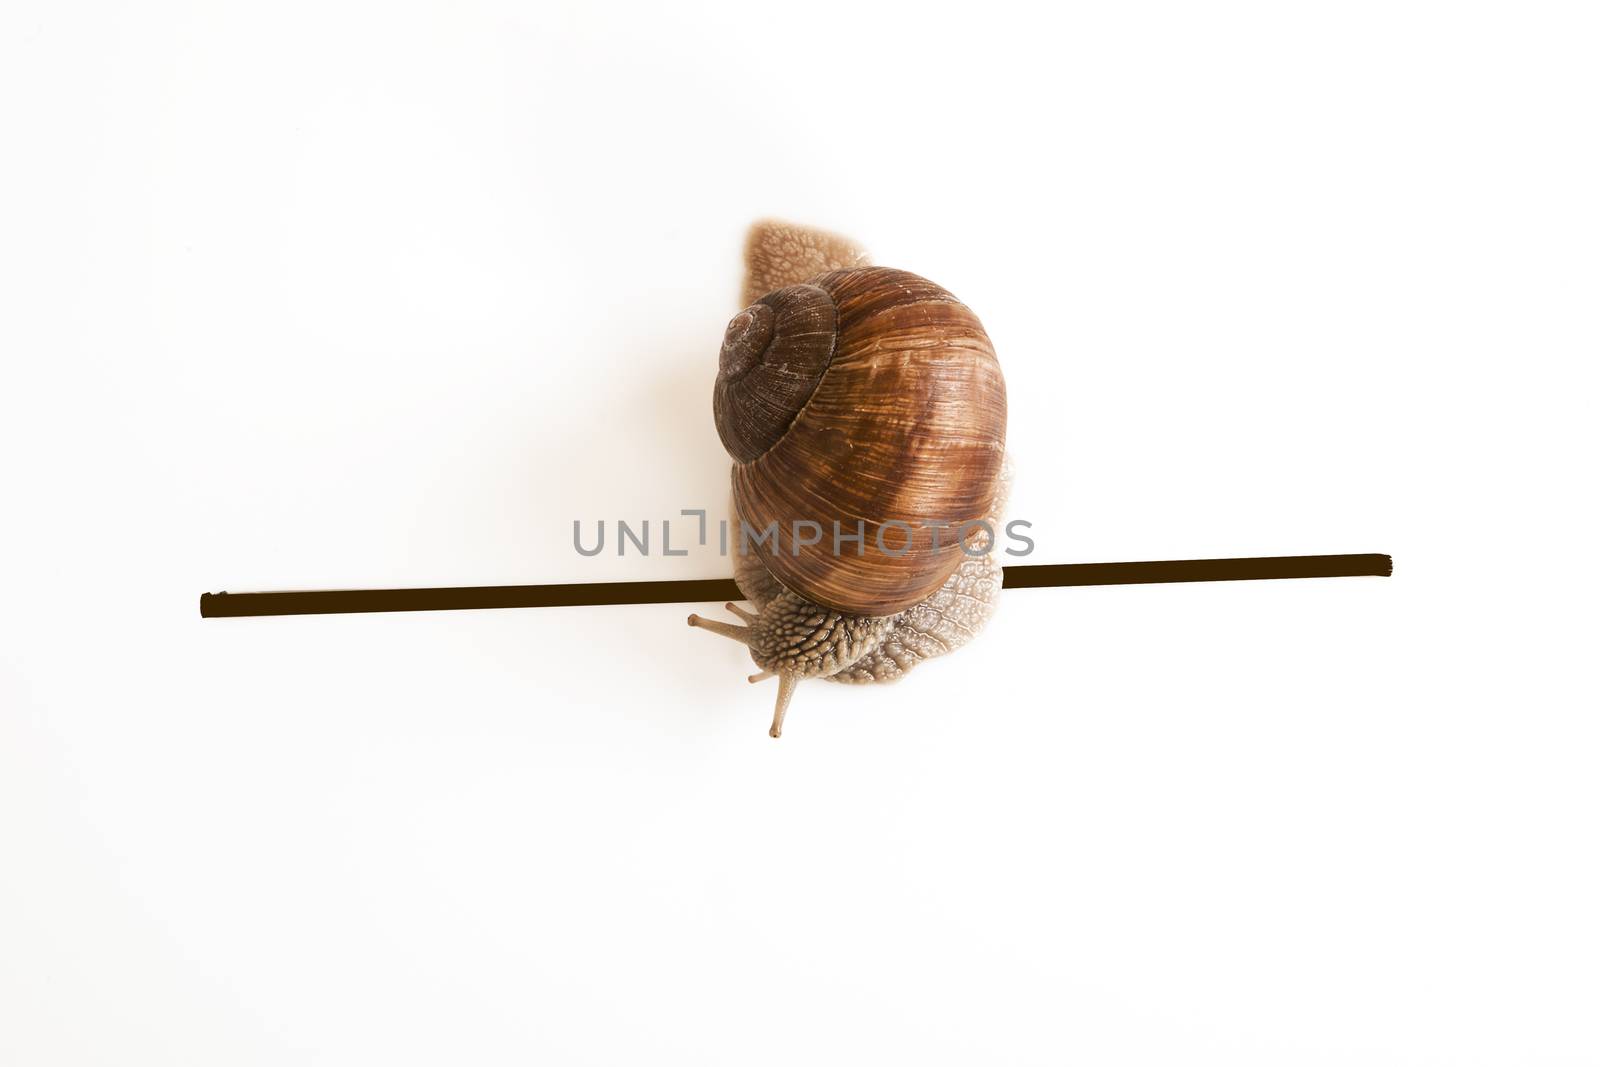 Cute snail going over the finish line.